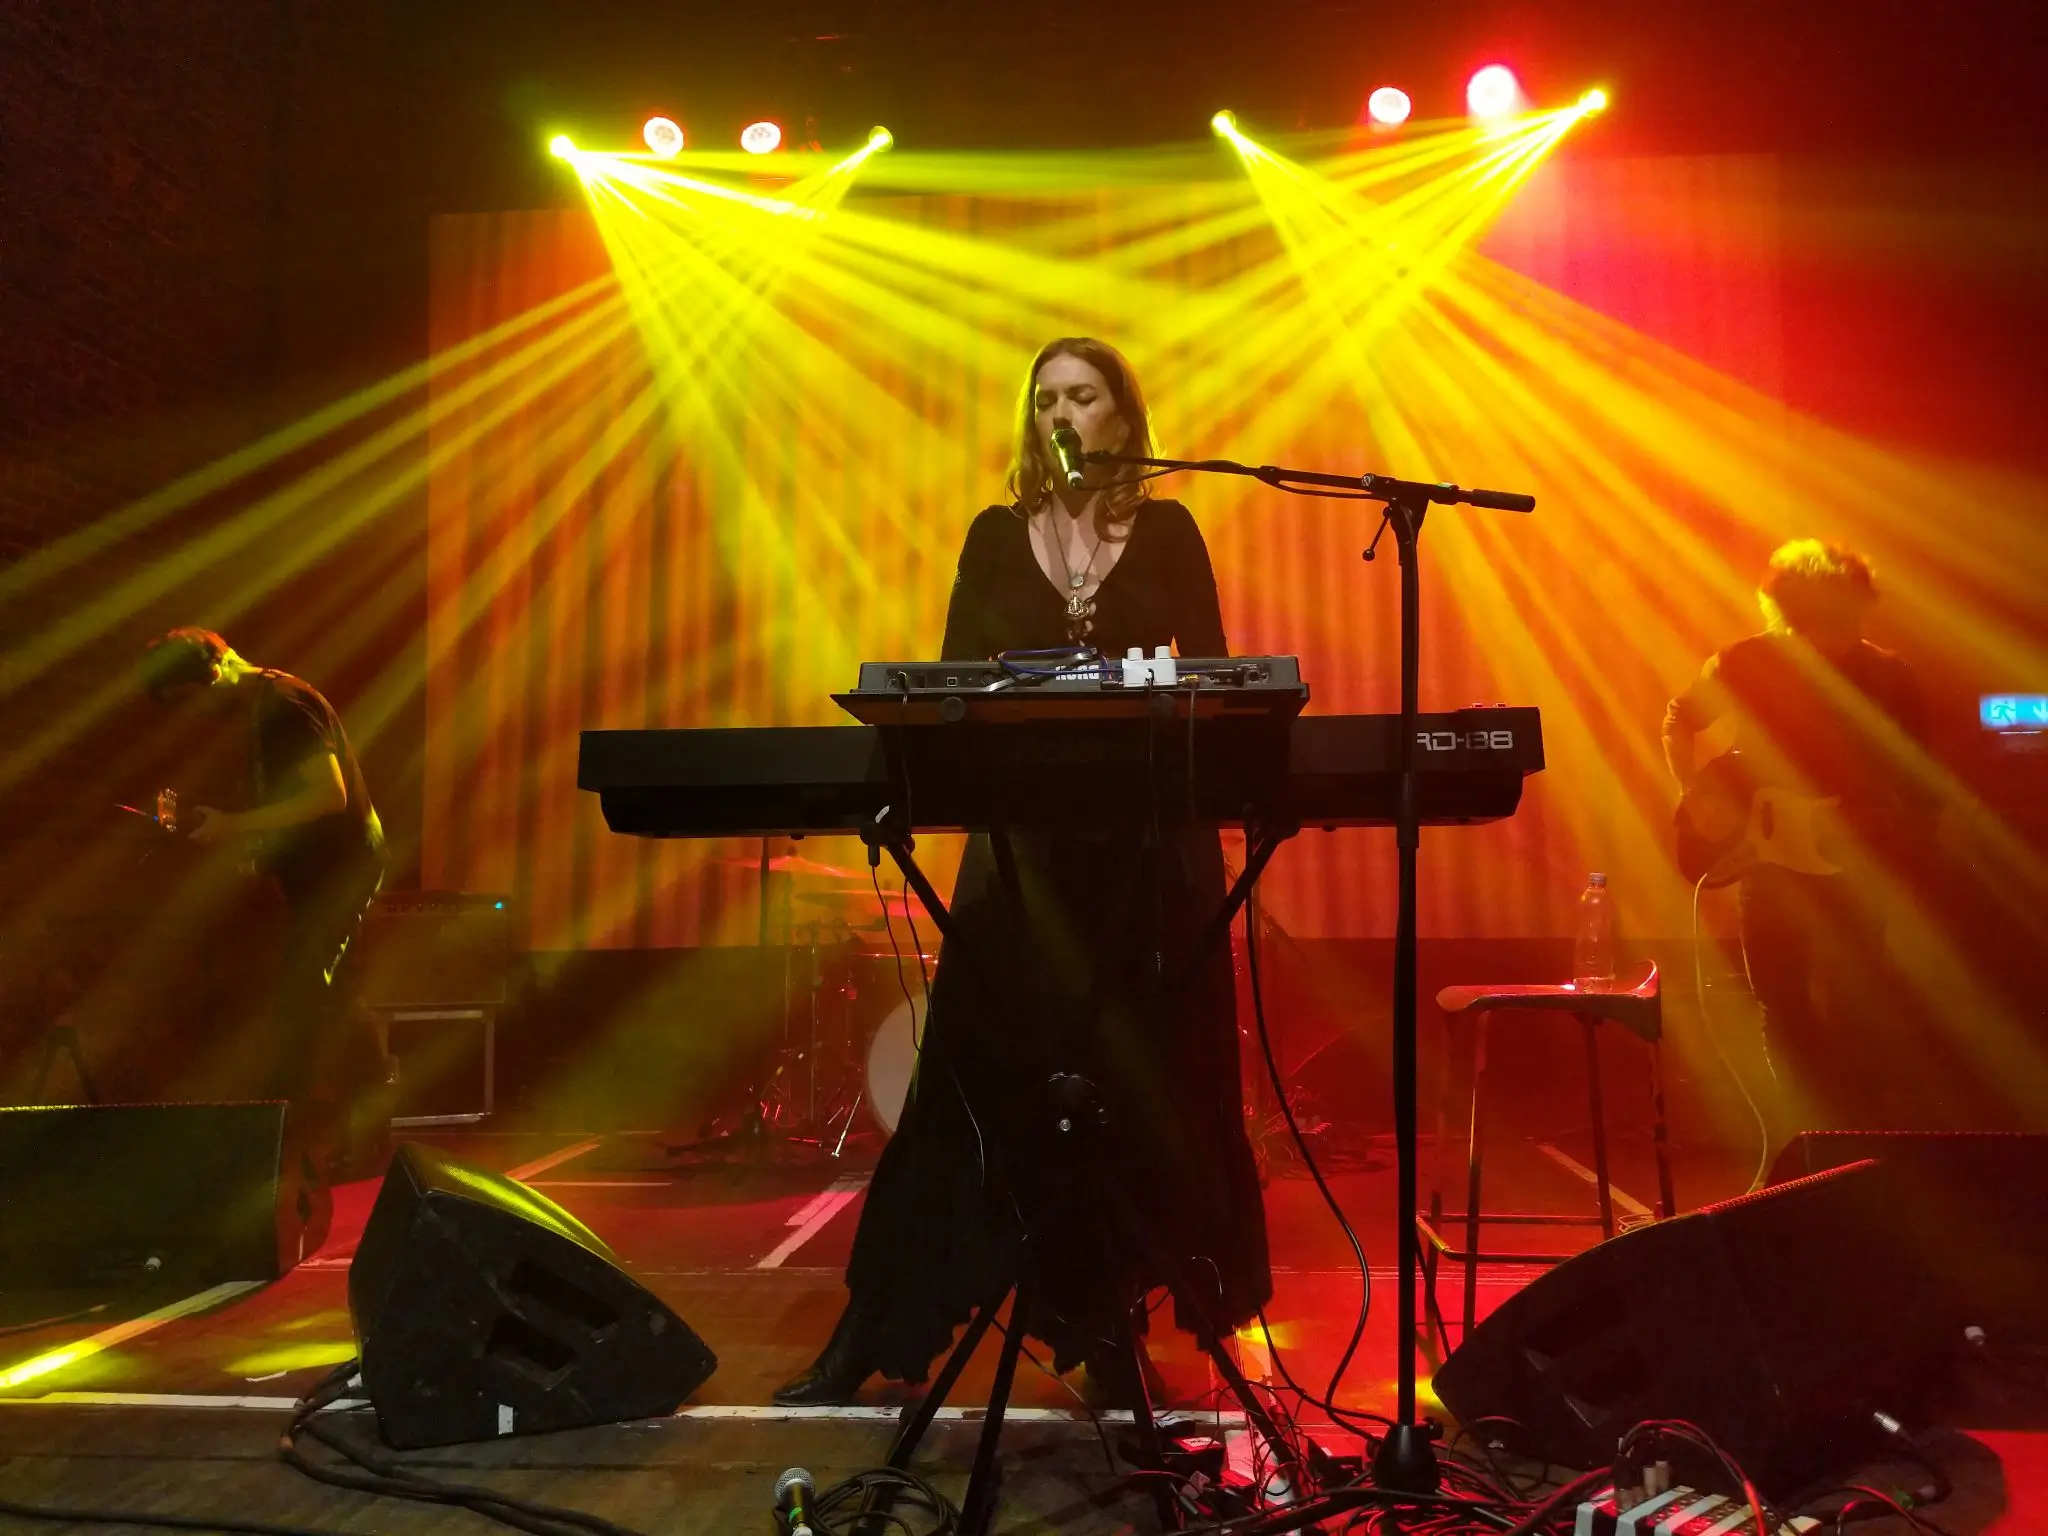 A woman is standing in the middle of the stage behind a couple of keyboards, with orange and yellow lights radiating behind her. A guitarist and bassist are visible on each side, further back, moving energetically.